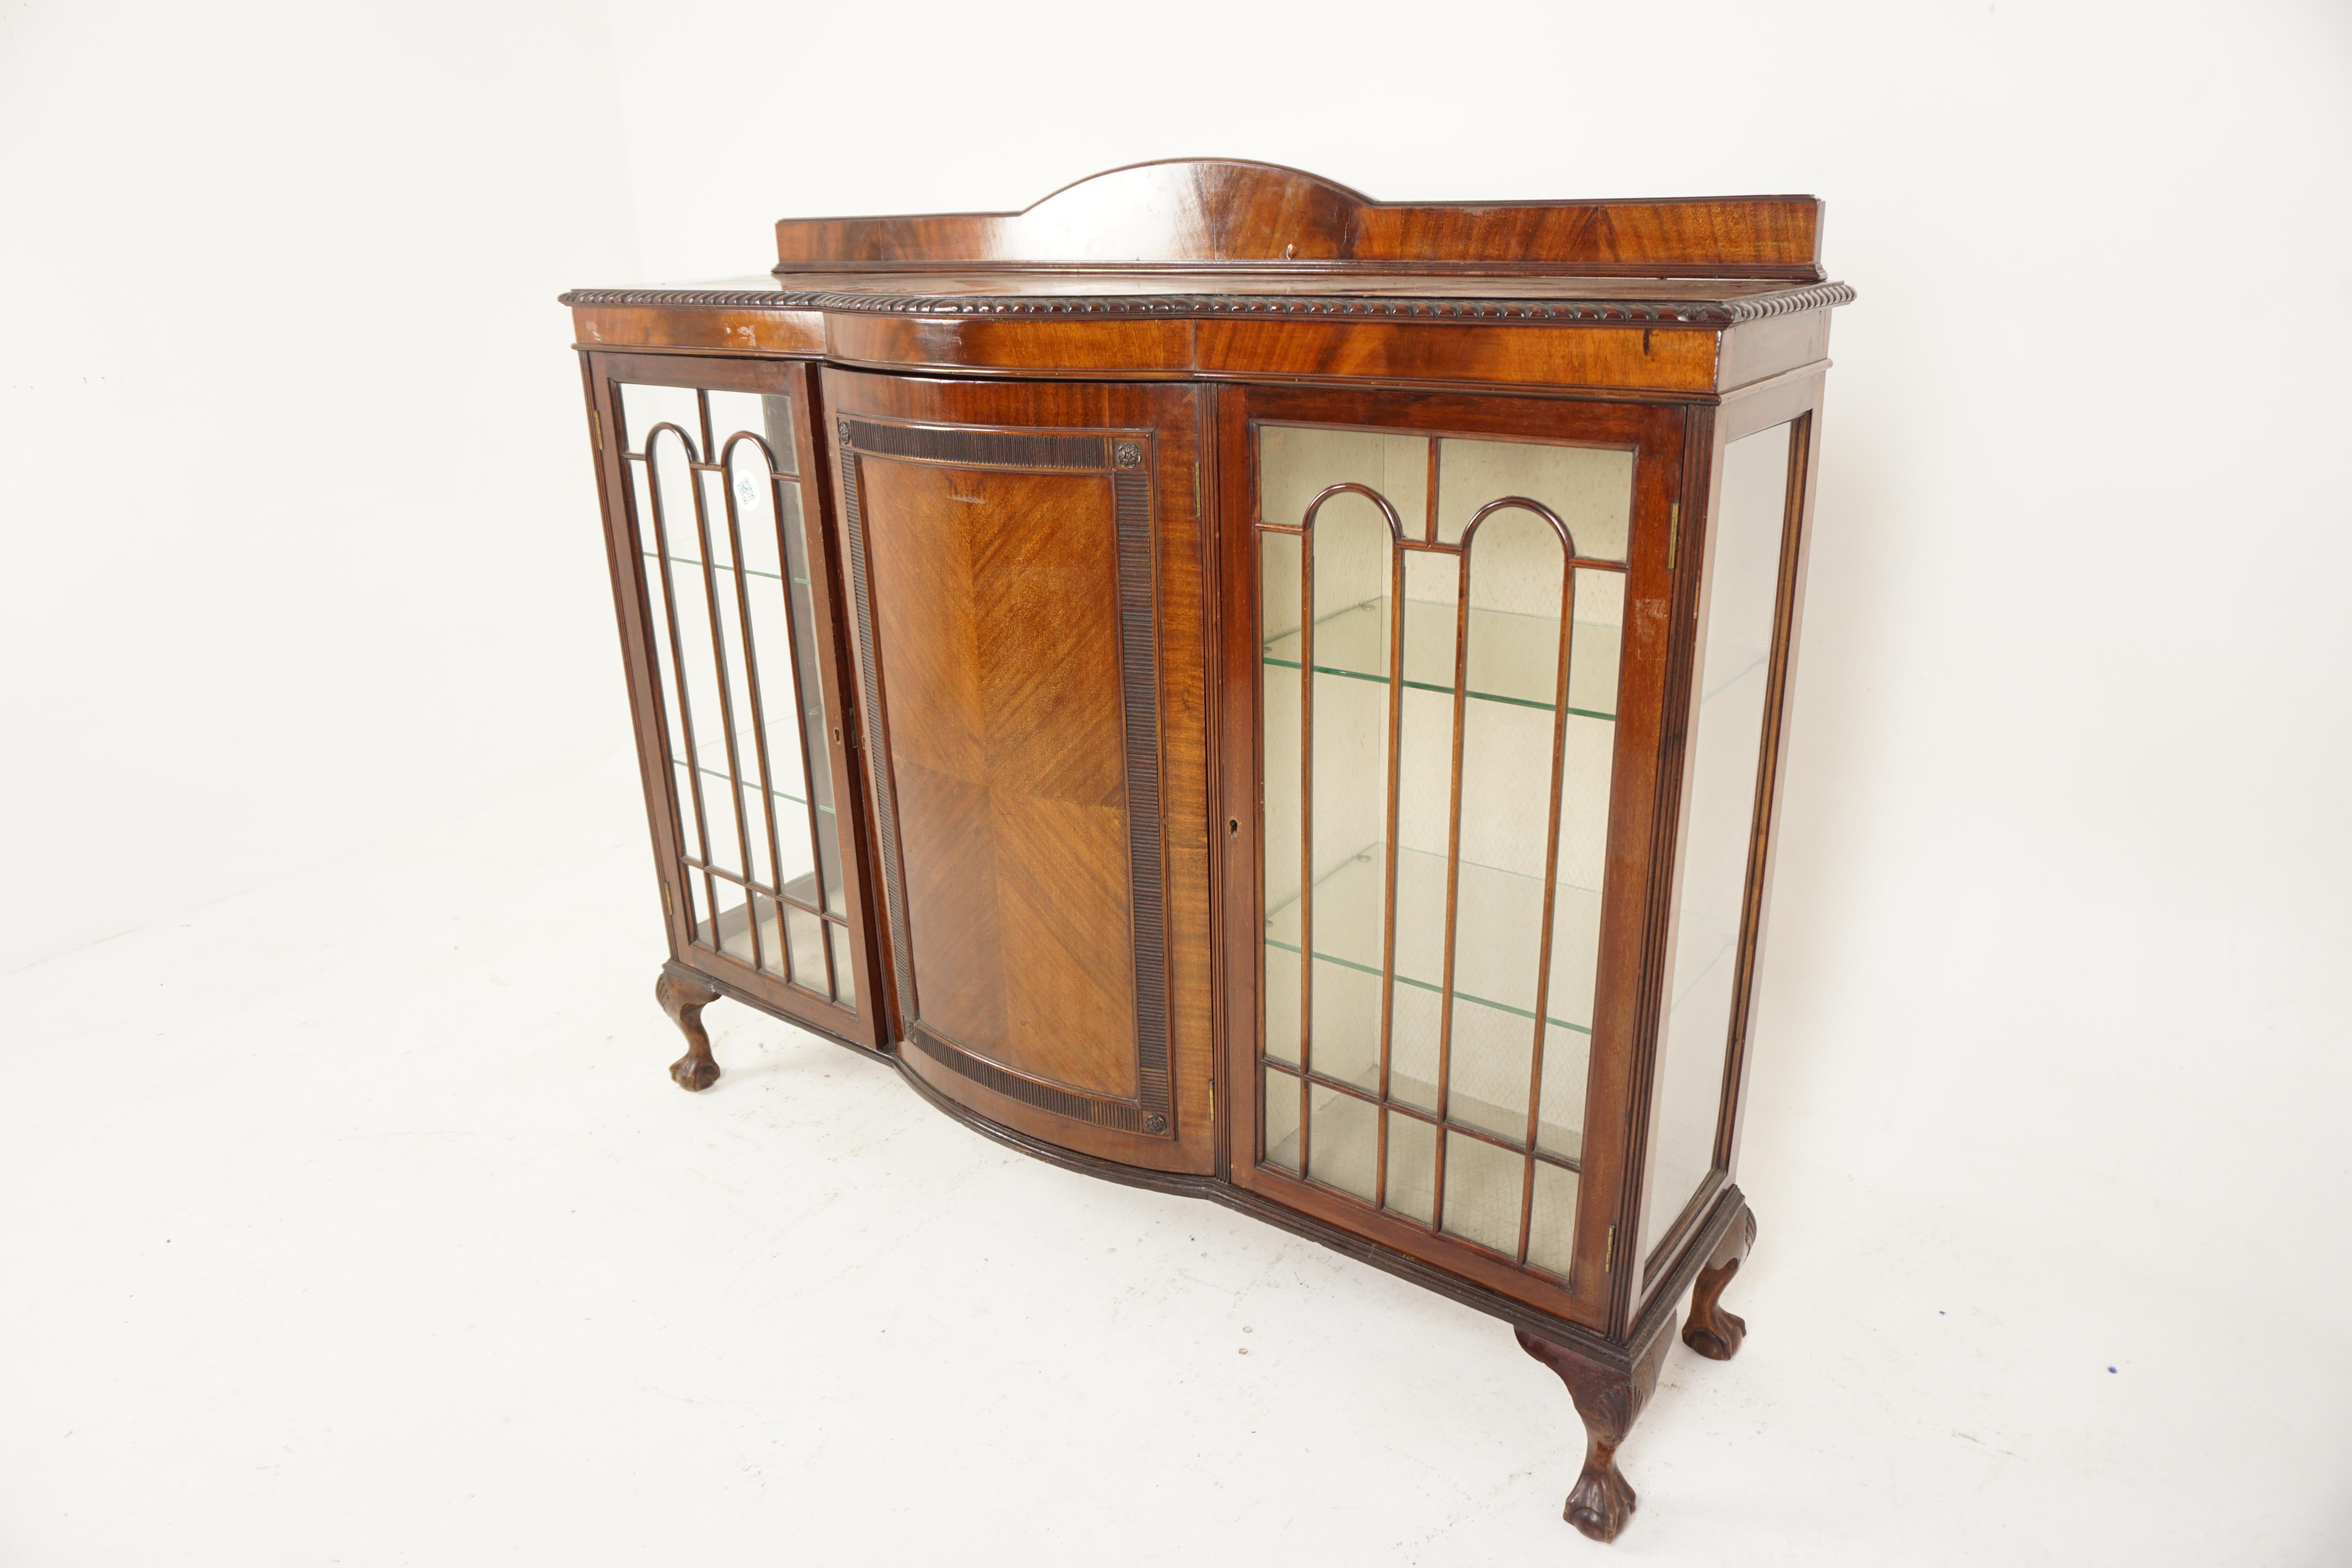 Antique walnut display case, China cabinet quality bow front, Scotland 1900, H732

Scotland 1900
Solid walnut
Original finish
Moulded top with classic pie crust edge
With desirable bow front to the central door with two interior